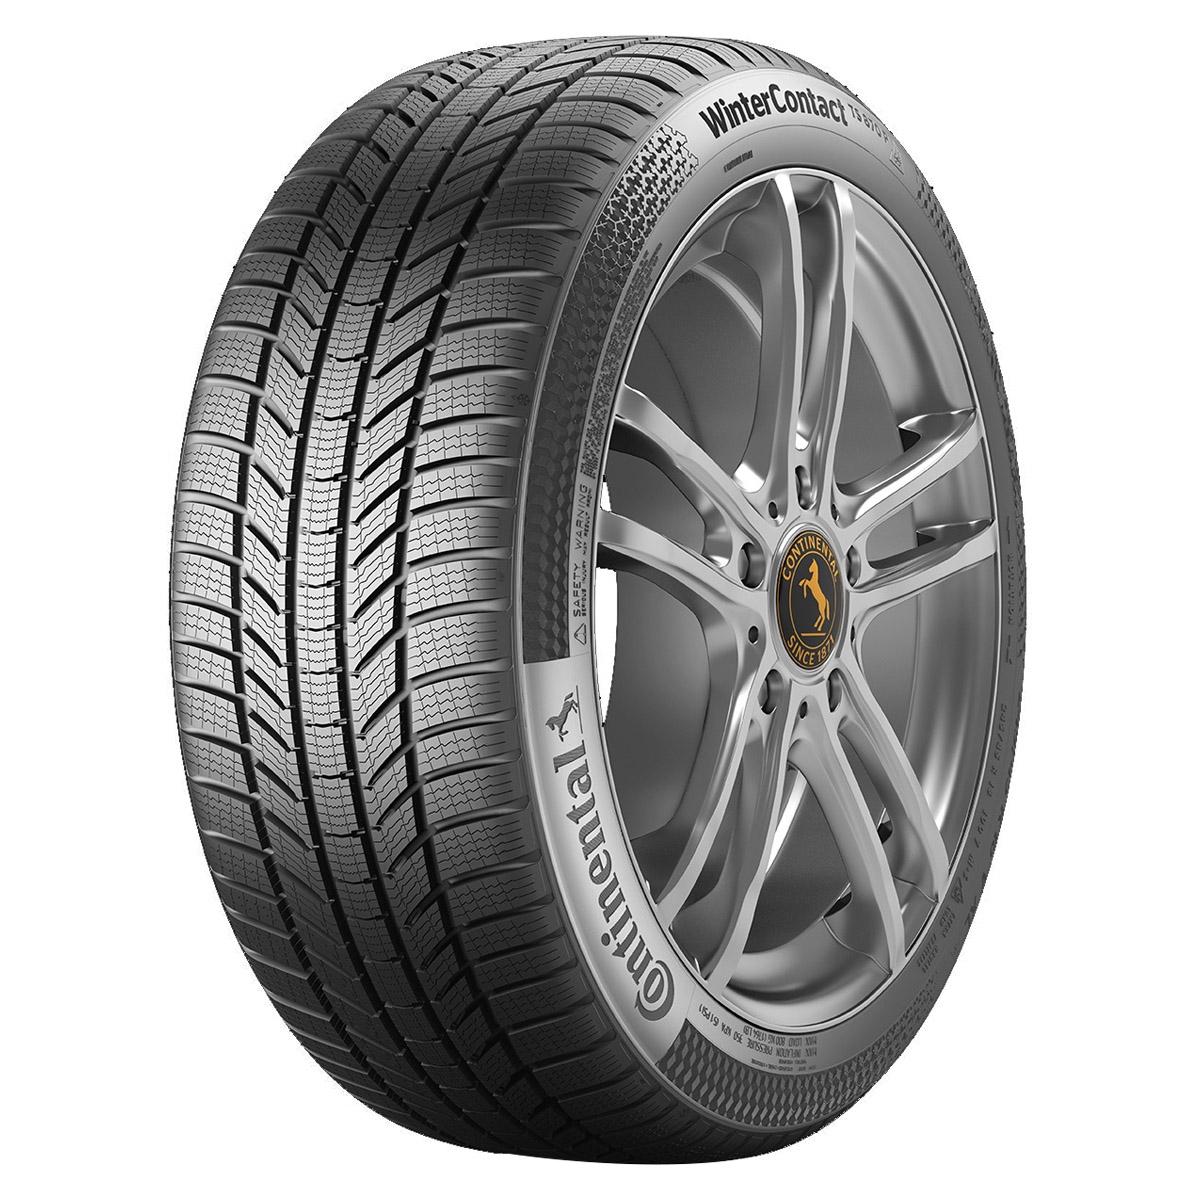 Anvelope iarna CONTINENTAL WINTER CONTACT TS870 P 205/55 R17 91H